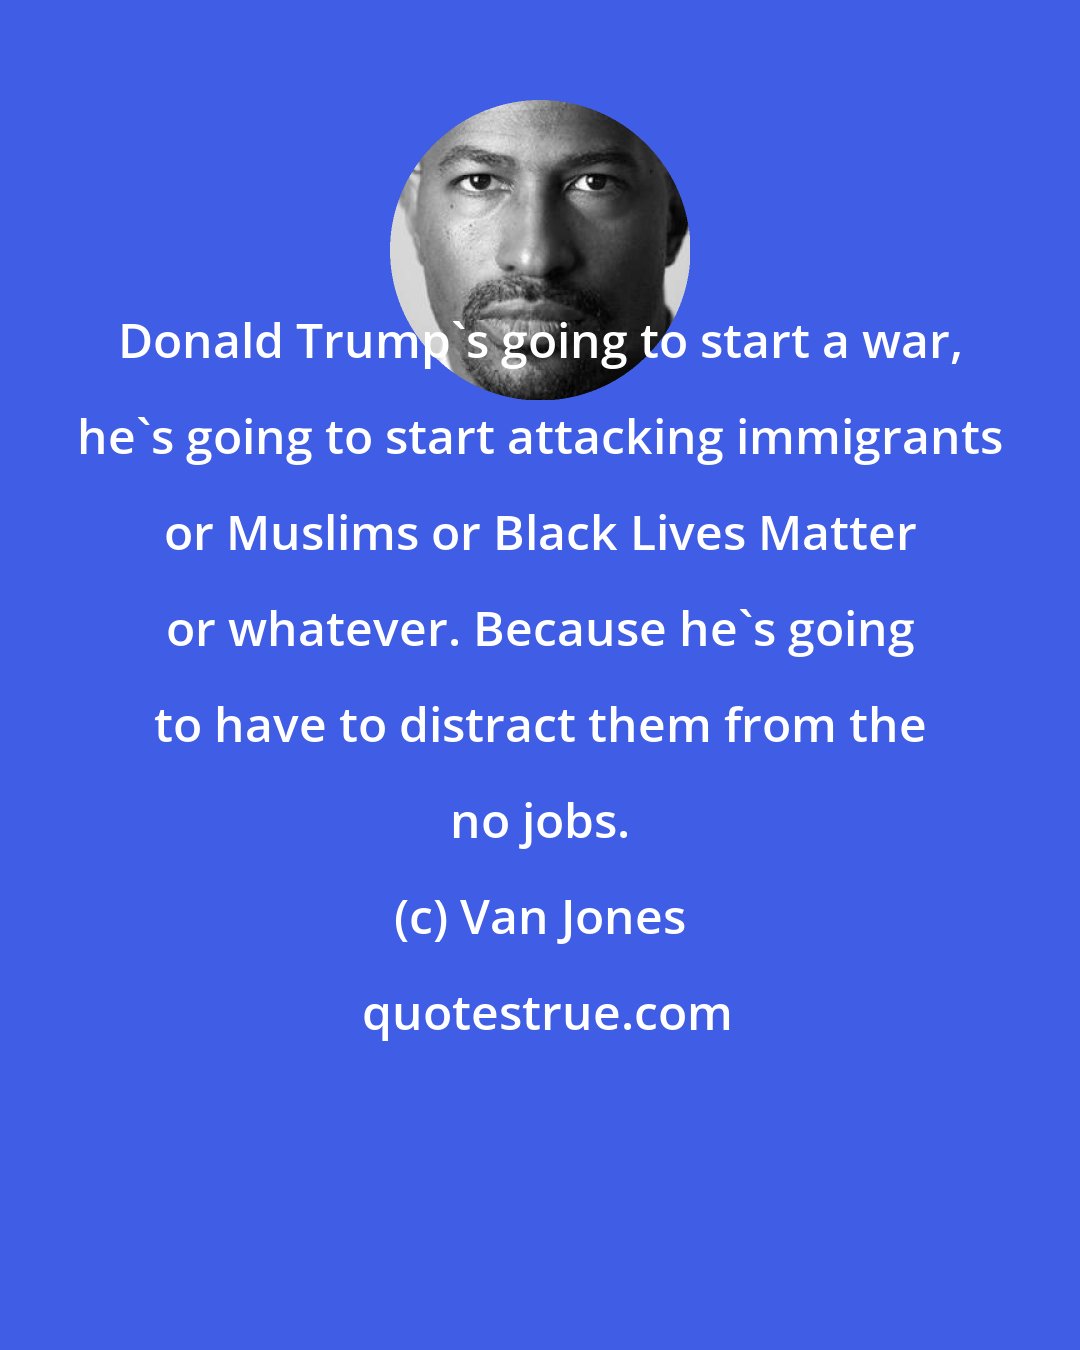 Van Jones: Donald Trump's going to start a war, he's going to start attacking immigrants or Muslims or Black Lives Matter or whatever. Because he's going to have to distract them from the no jobs.